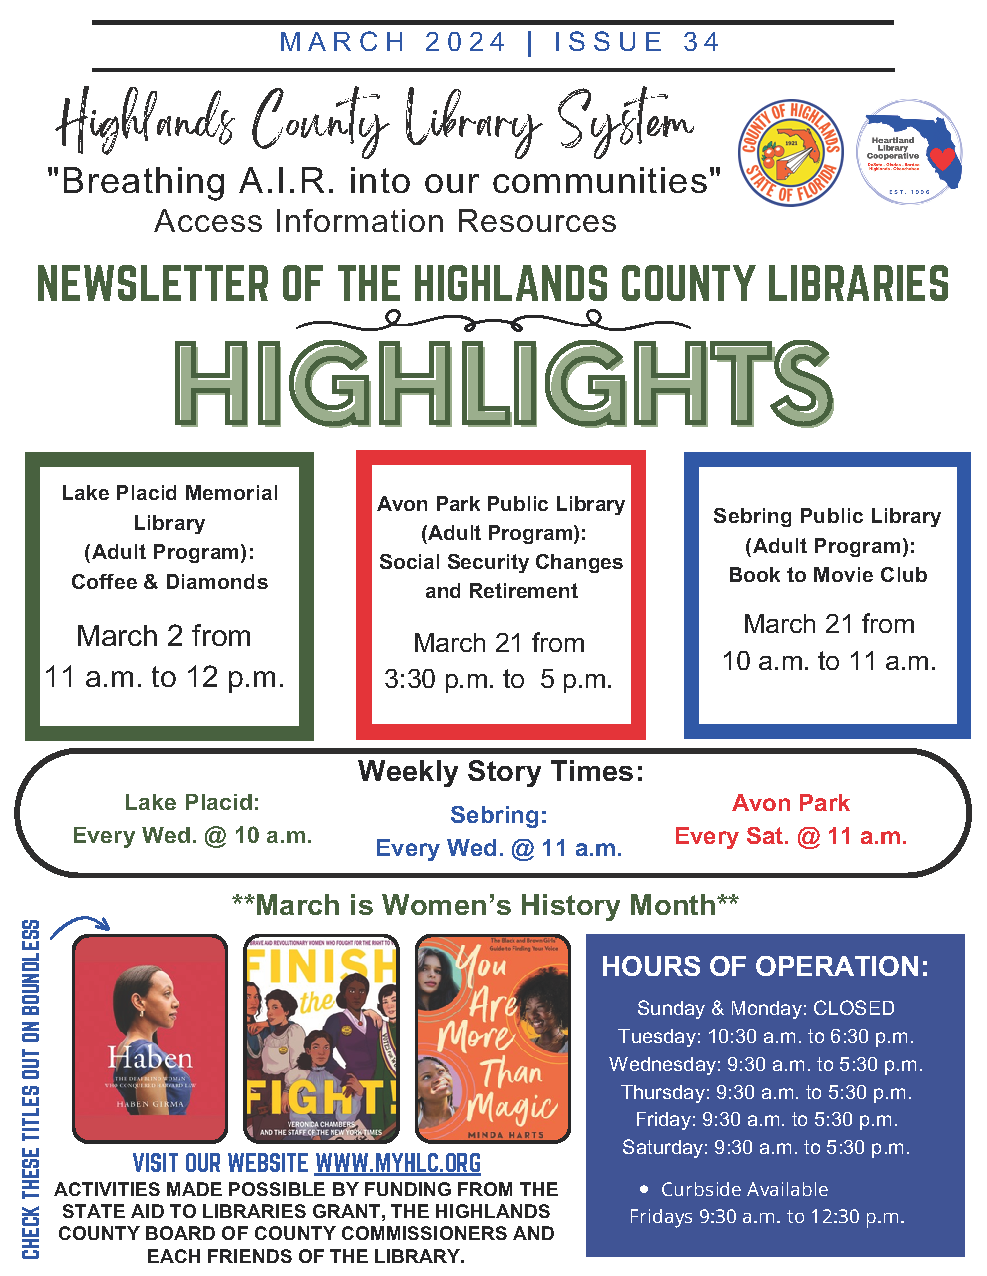 This is page one of the Highlands County Library System March 2024 newsletter. The full PDF version of the newsletter is available by clicking on the image.